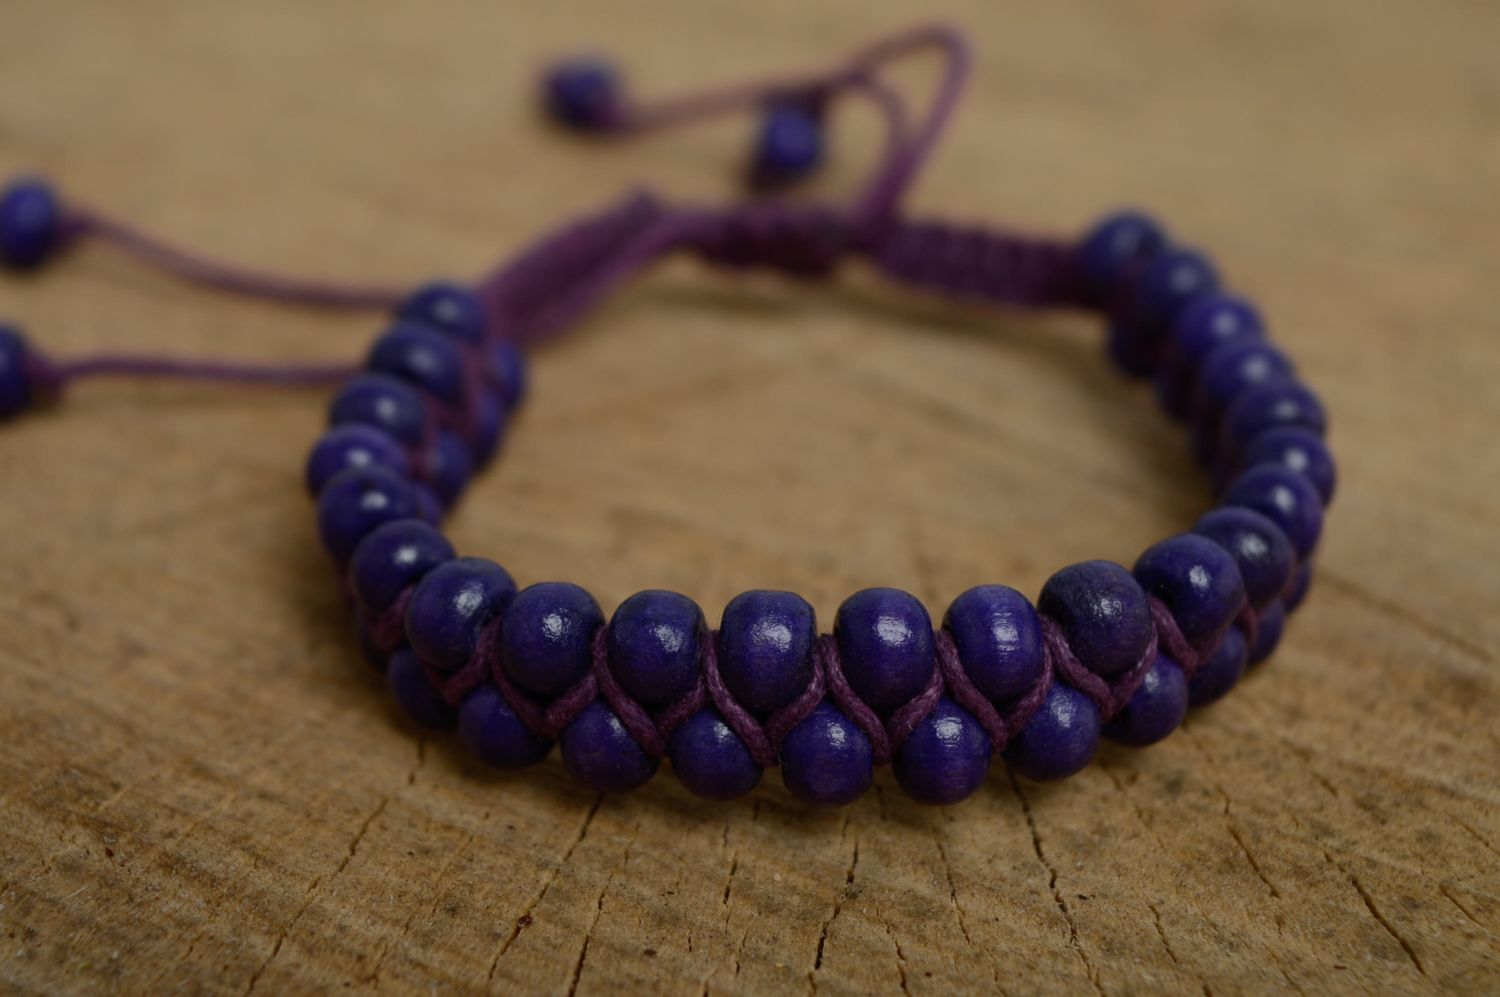 Violet macrame bracelet made of waxed cord and wooden beads photo 1